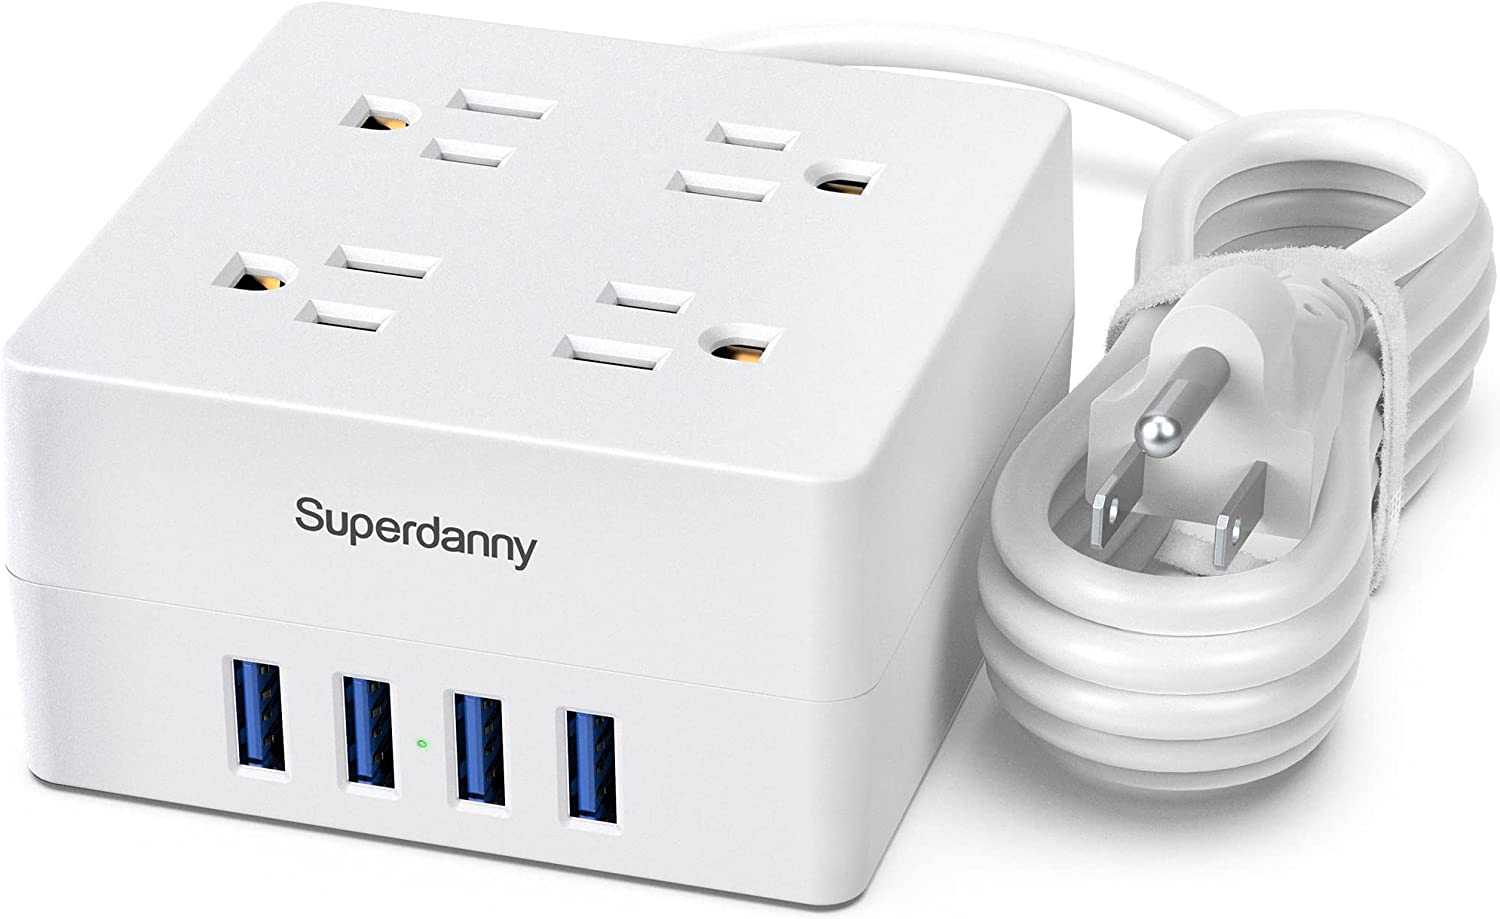 8 in 1 Universal Power Outlet (5 Ft Cord - White)